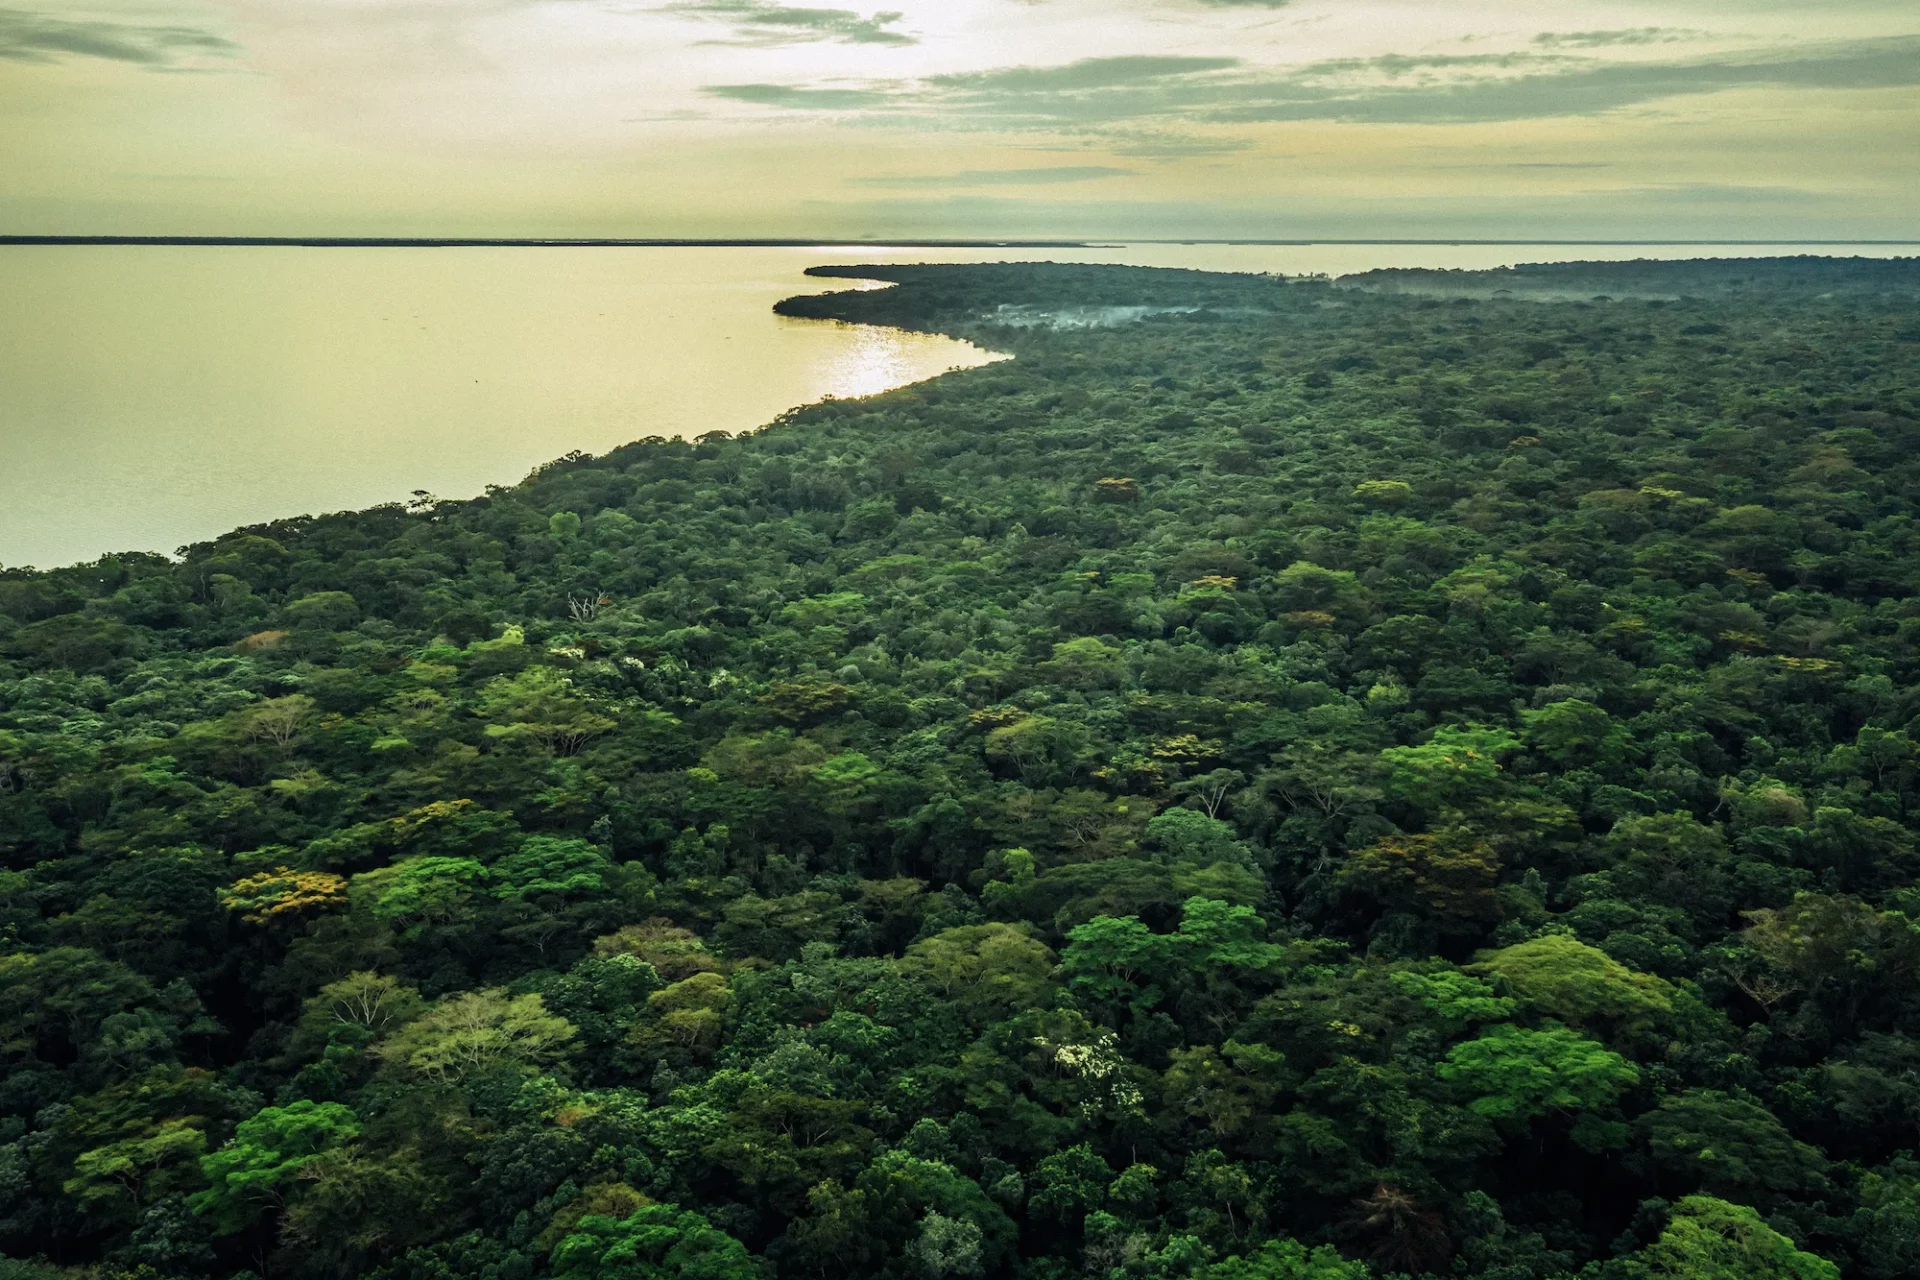 Ambitious New Plan to Scale Up REDD+ Announced